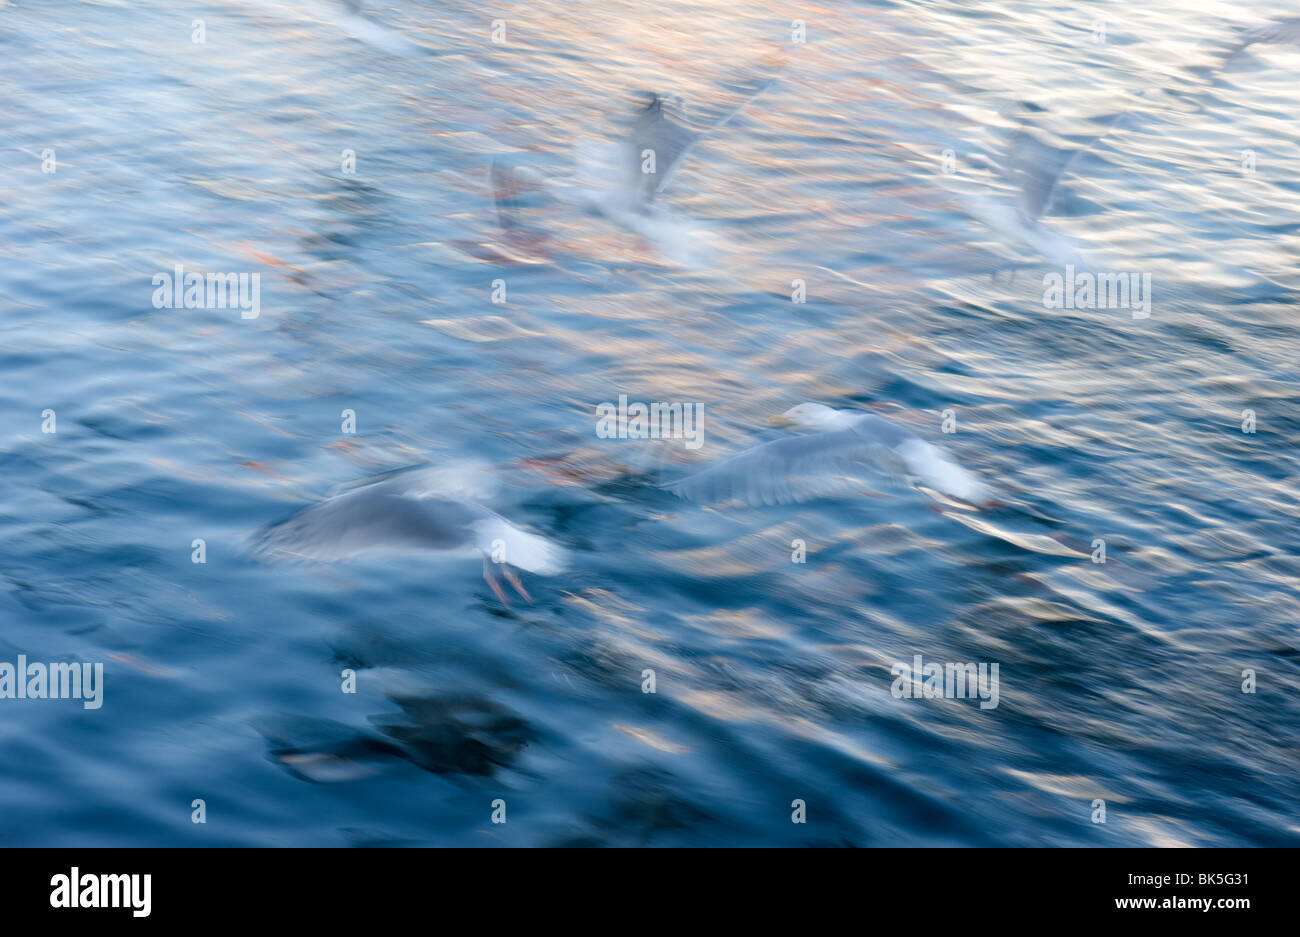 Seagulls, abstract and artistic concept Stock Photo